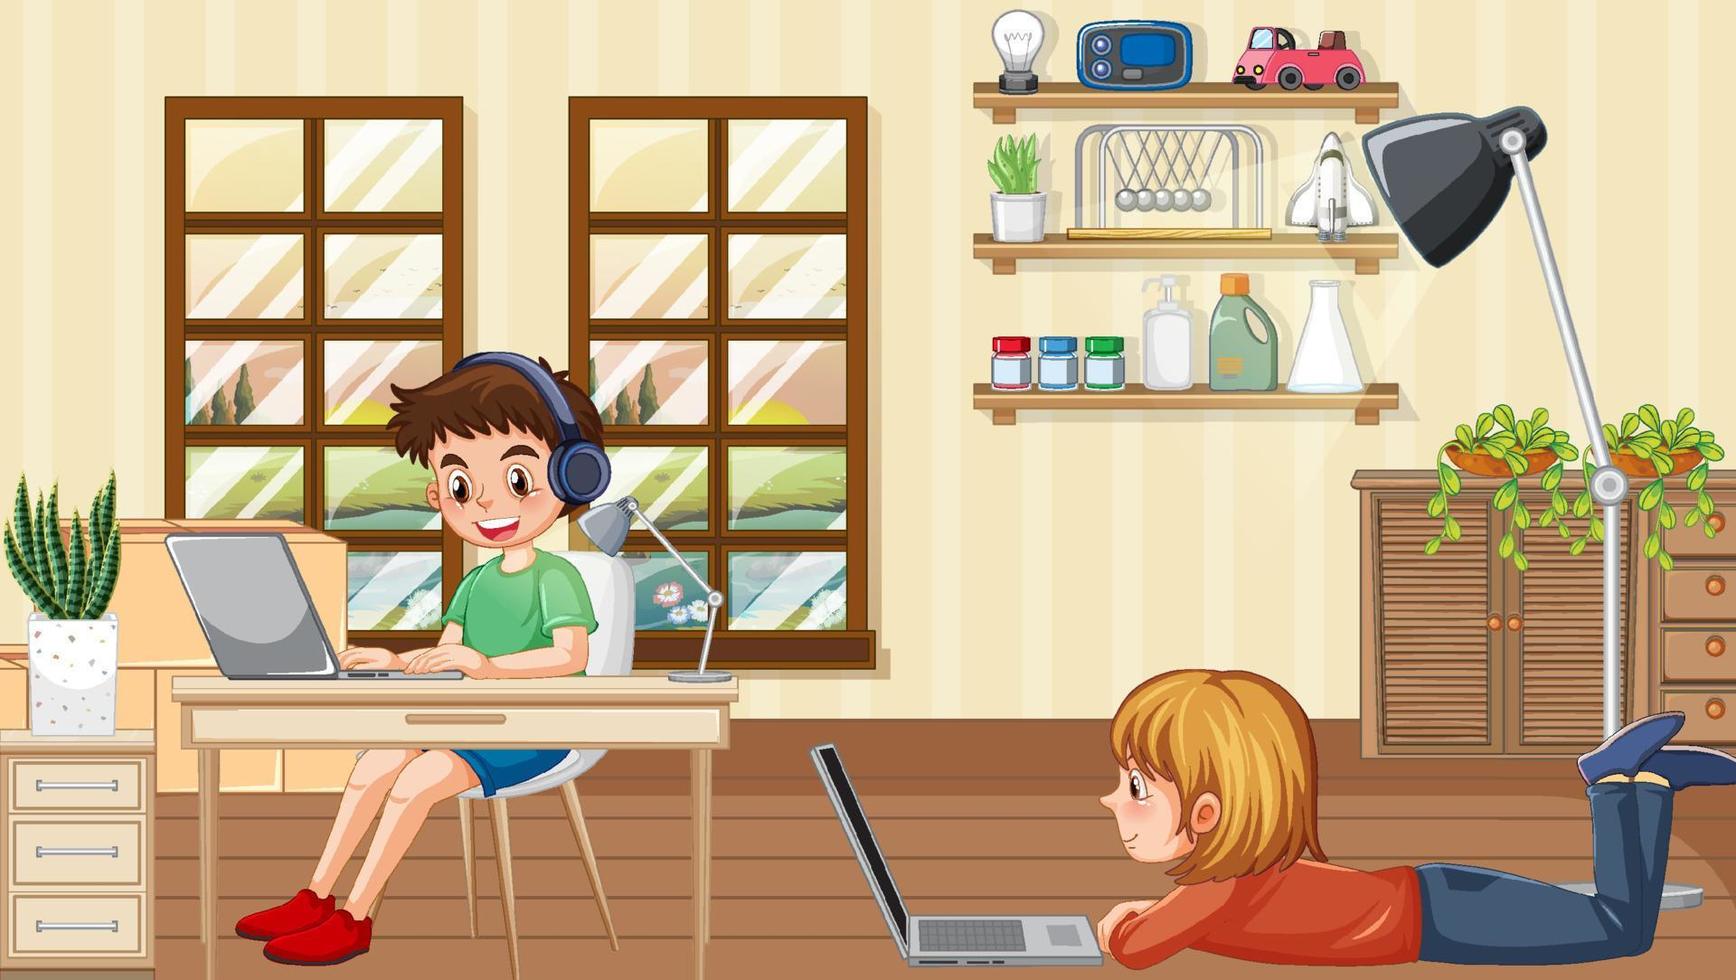 Children using technology devices at home vector